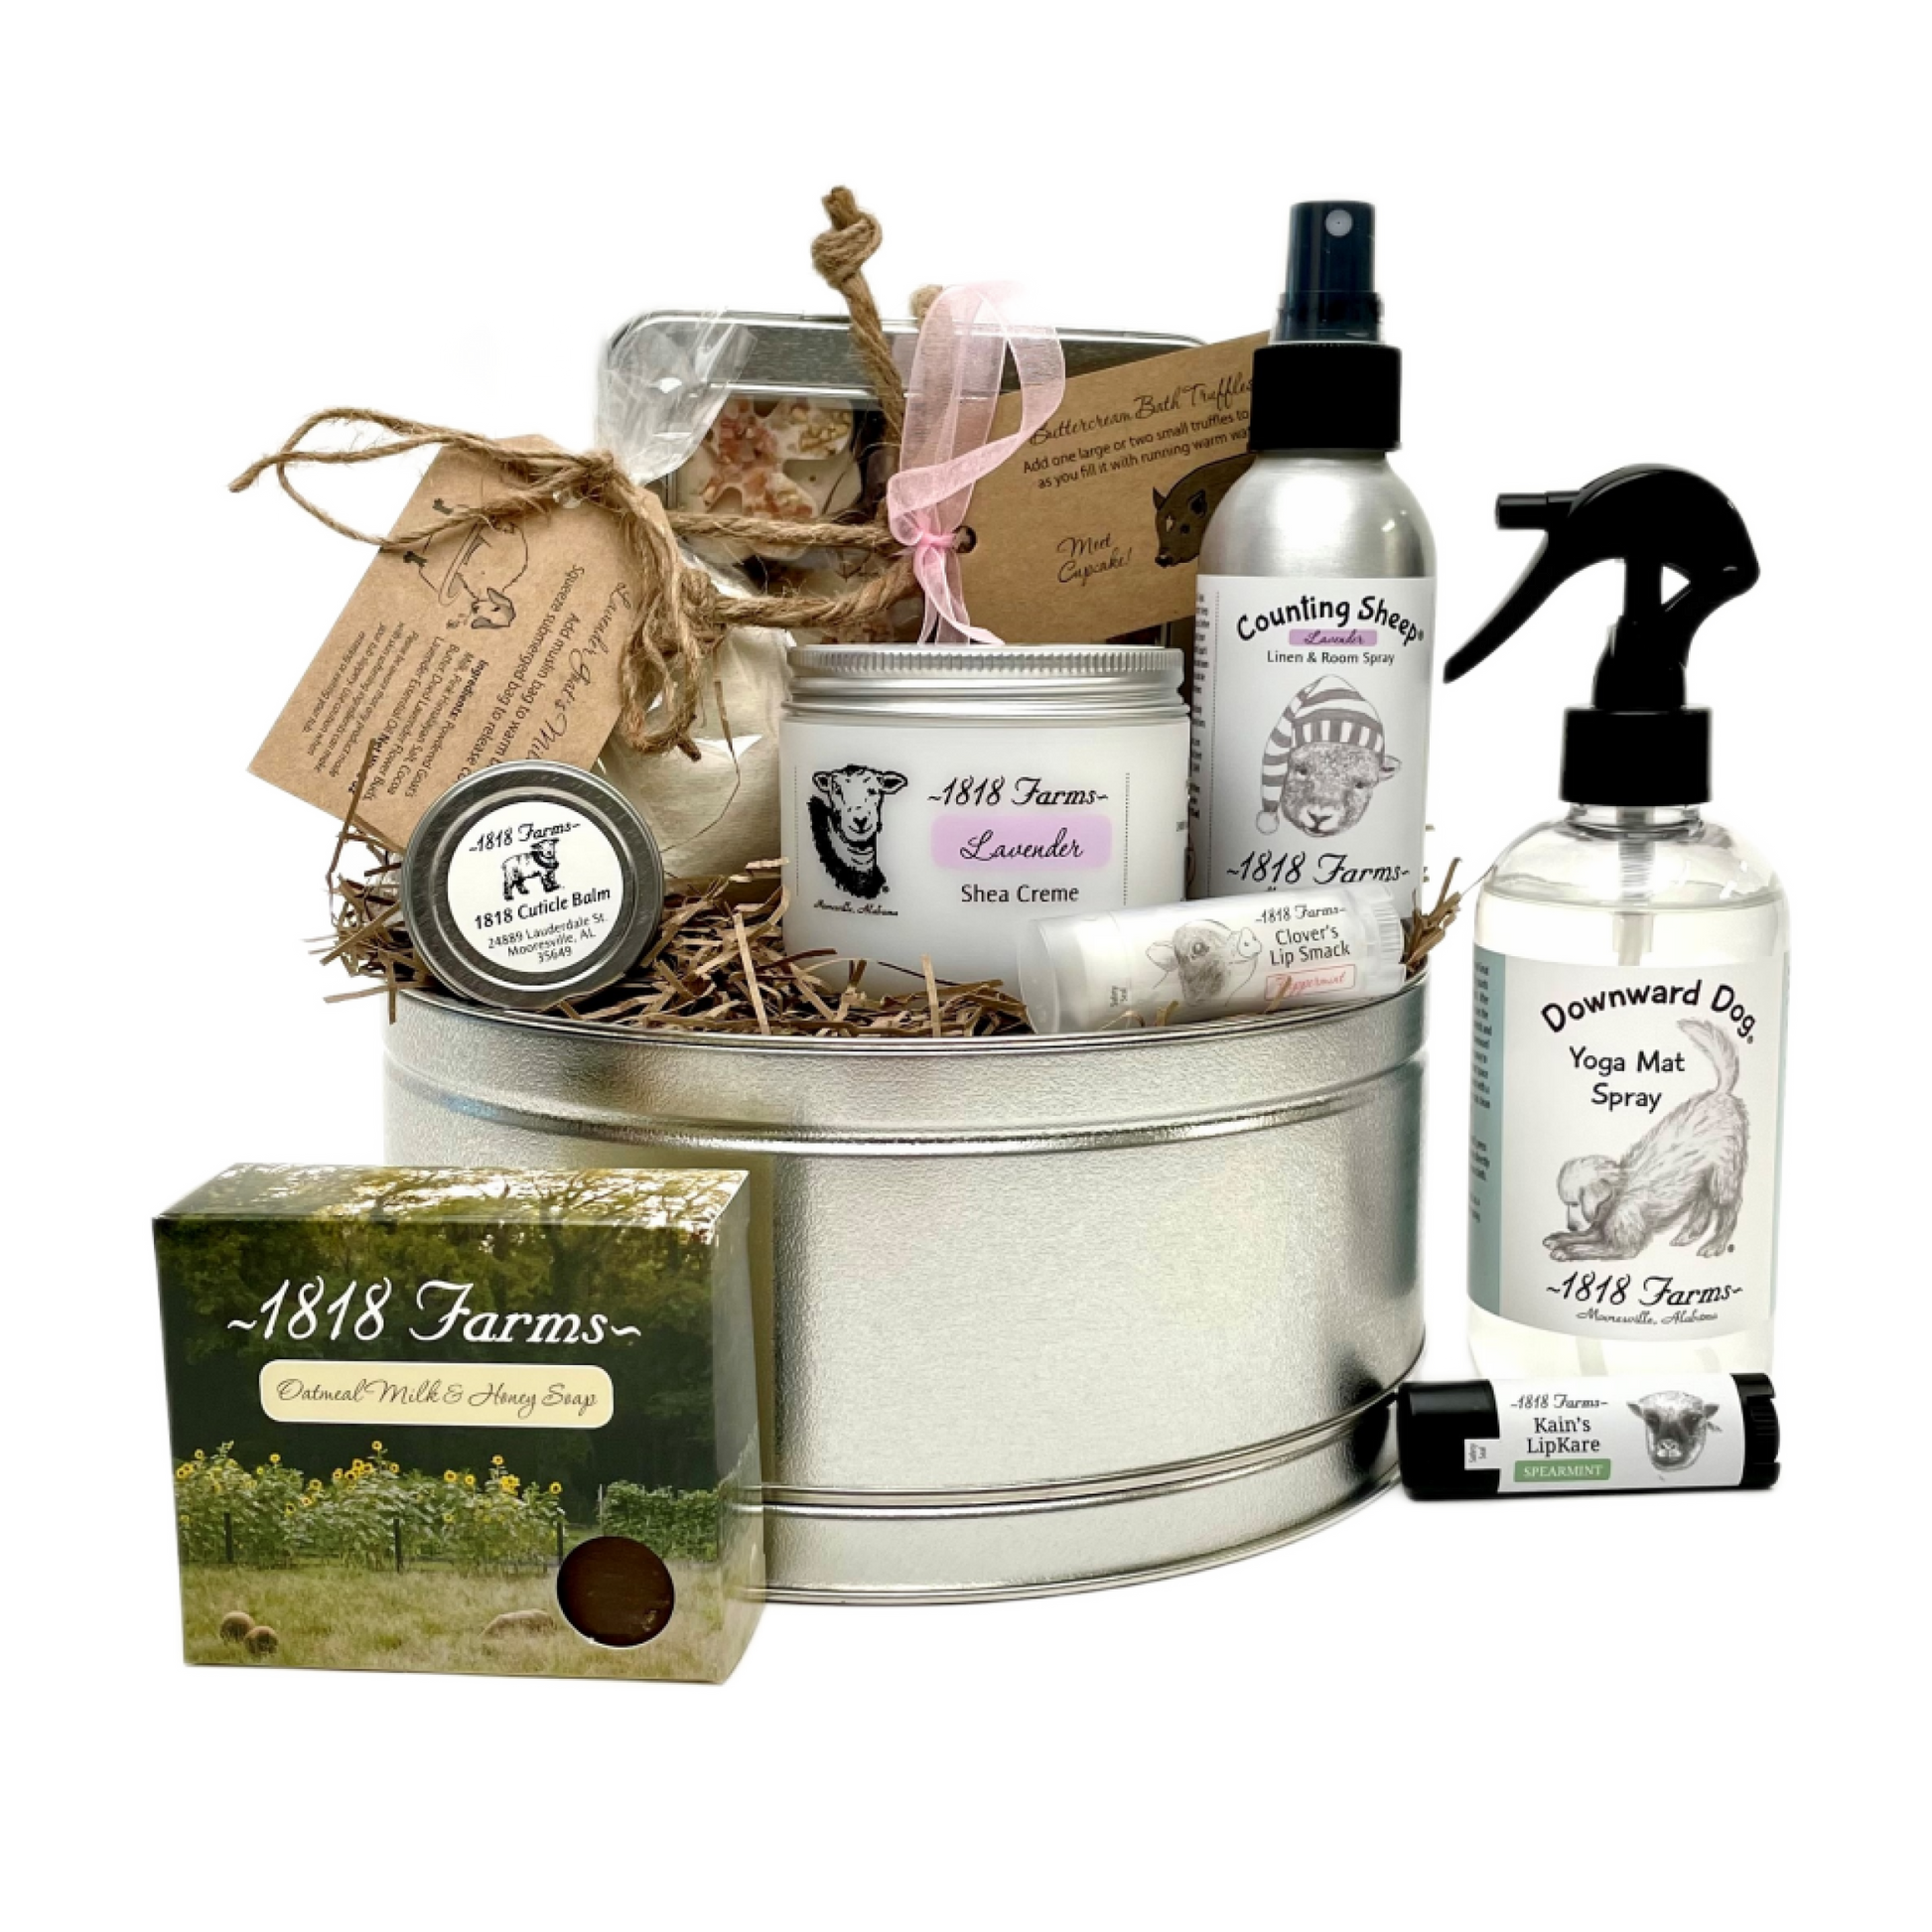 “Everything on the Farm” Gift Basket Gift Basket 1818 Farms   